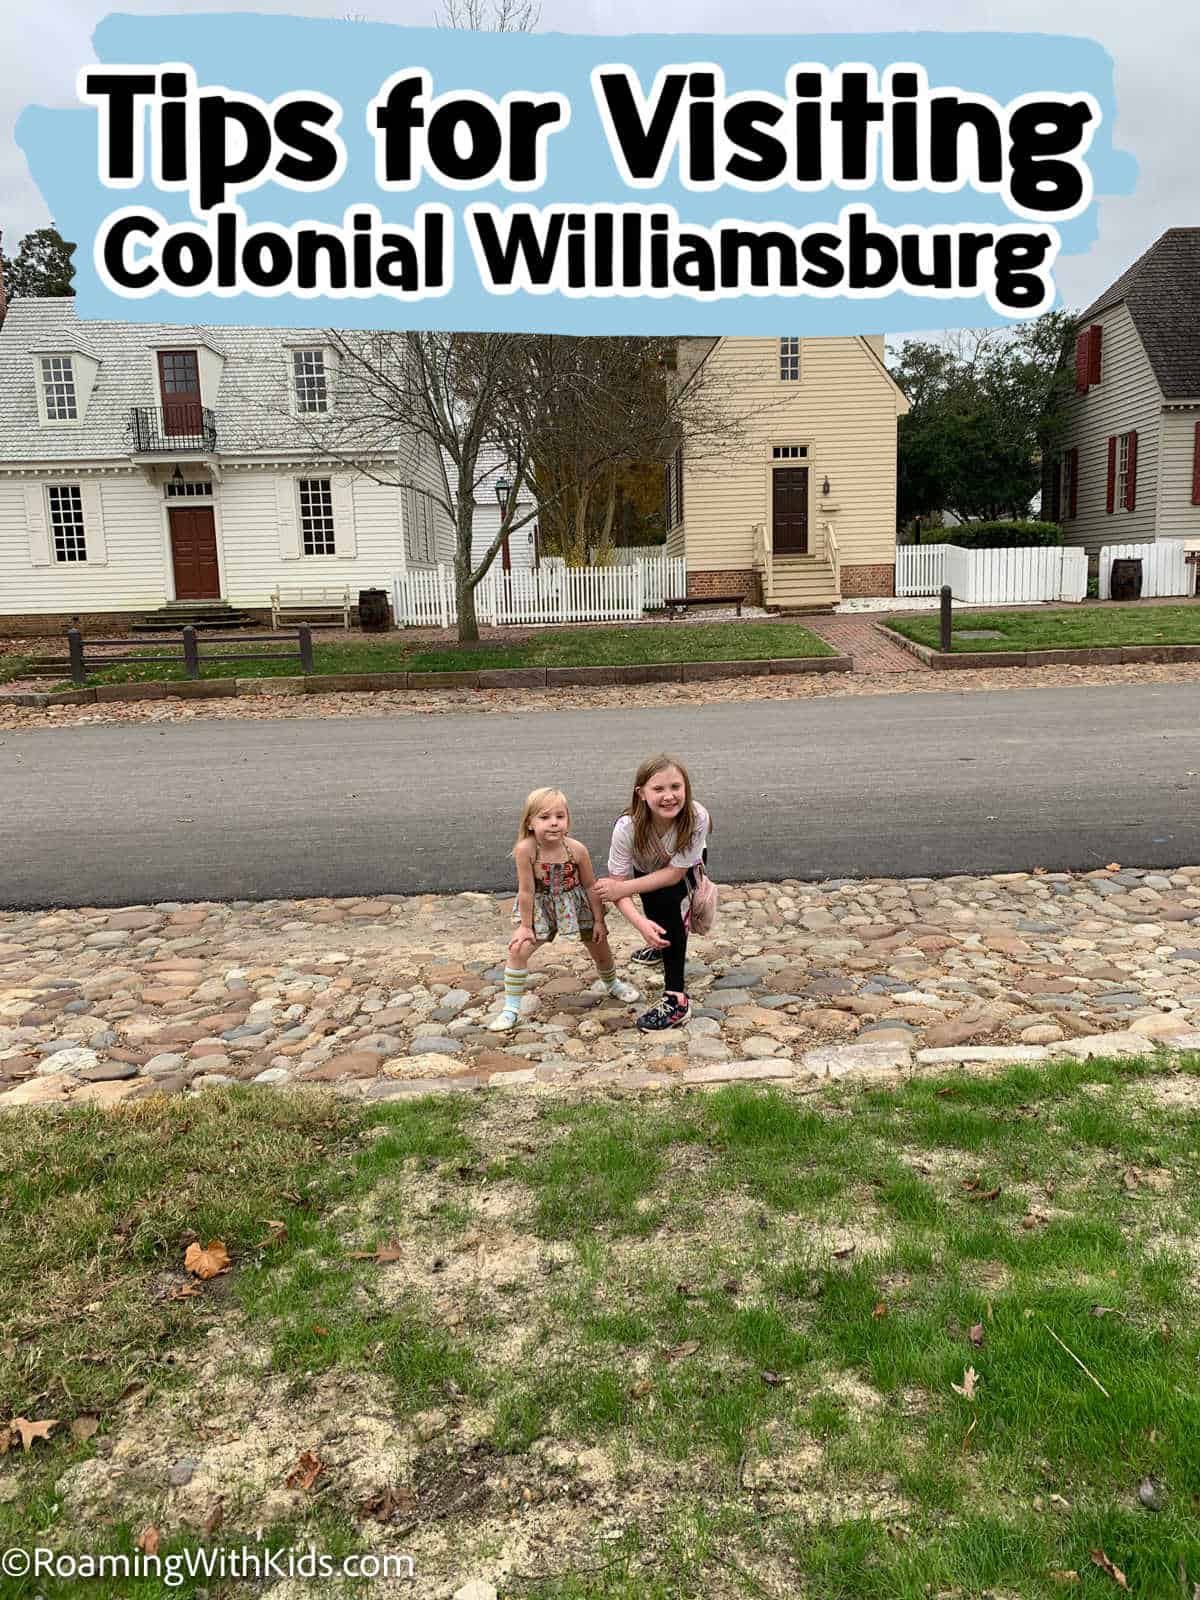 Tips for Exploring Colonial Williamsburg With Kids